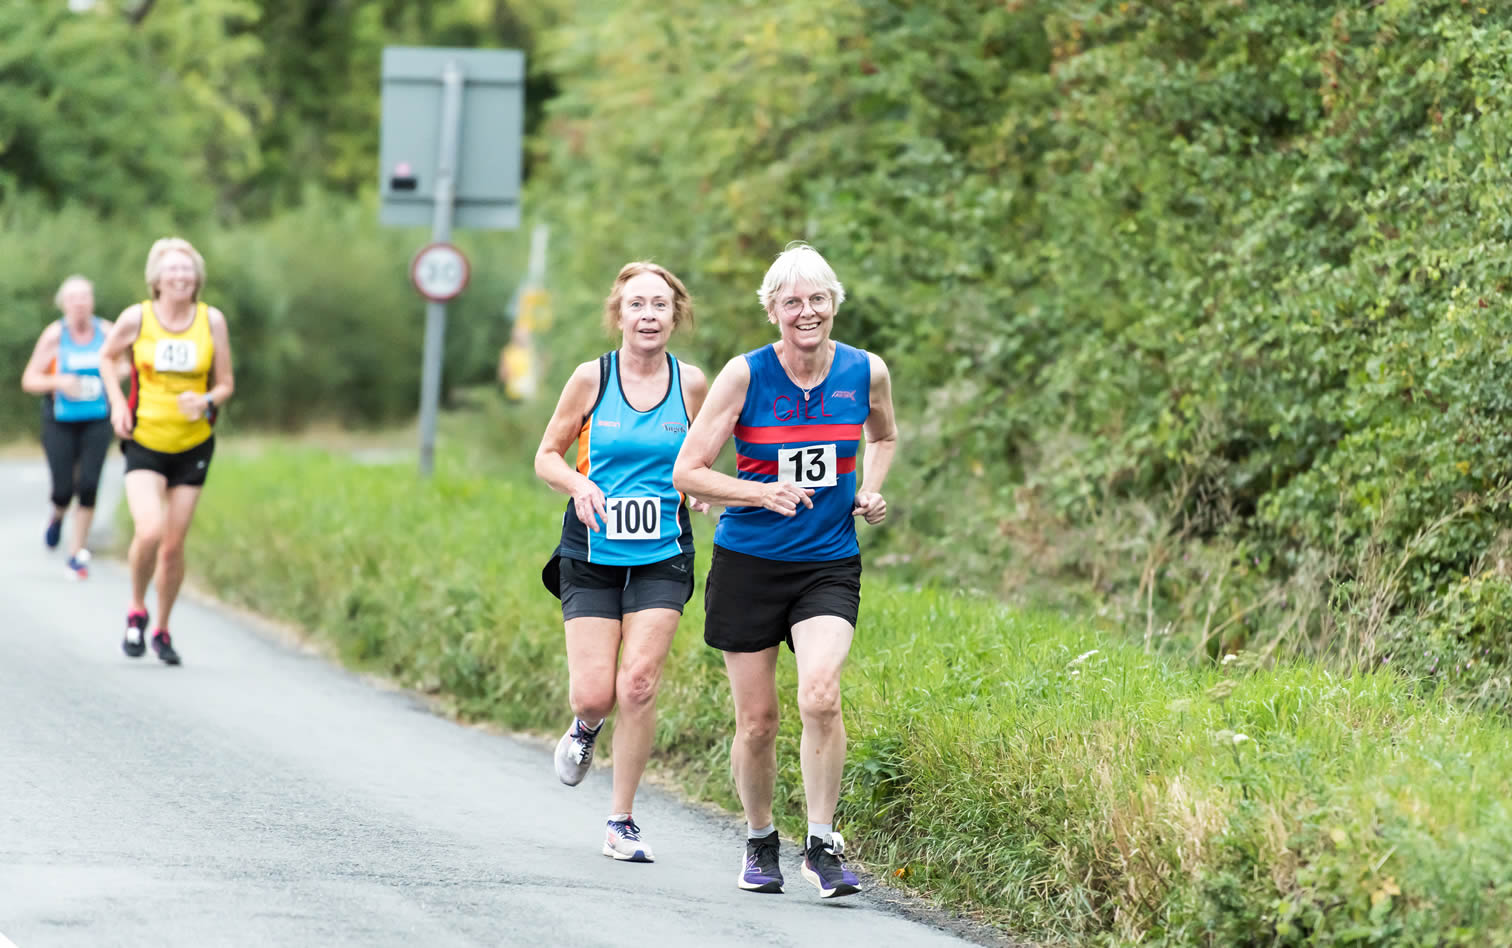 Bourton's Gill Carrick at Haresfield 5k, 300m to go - 17th August 2022